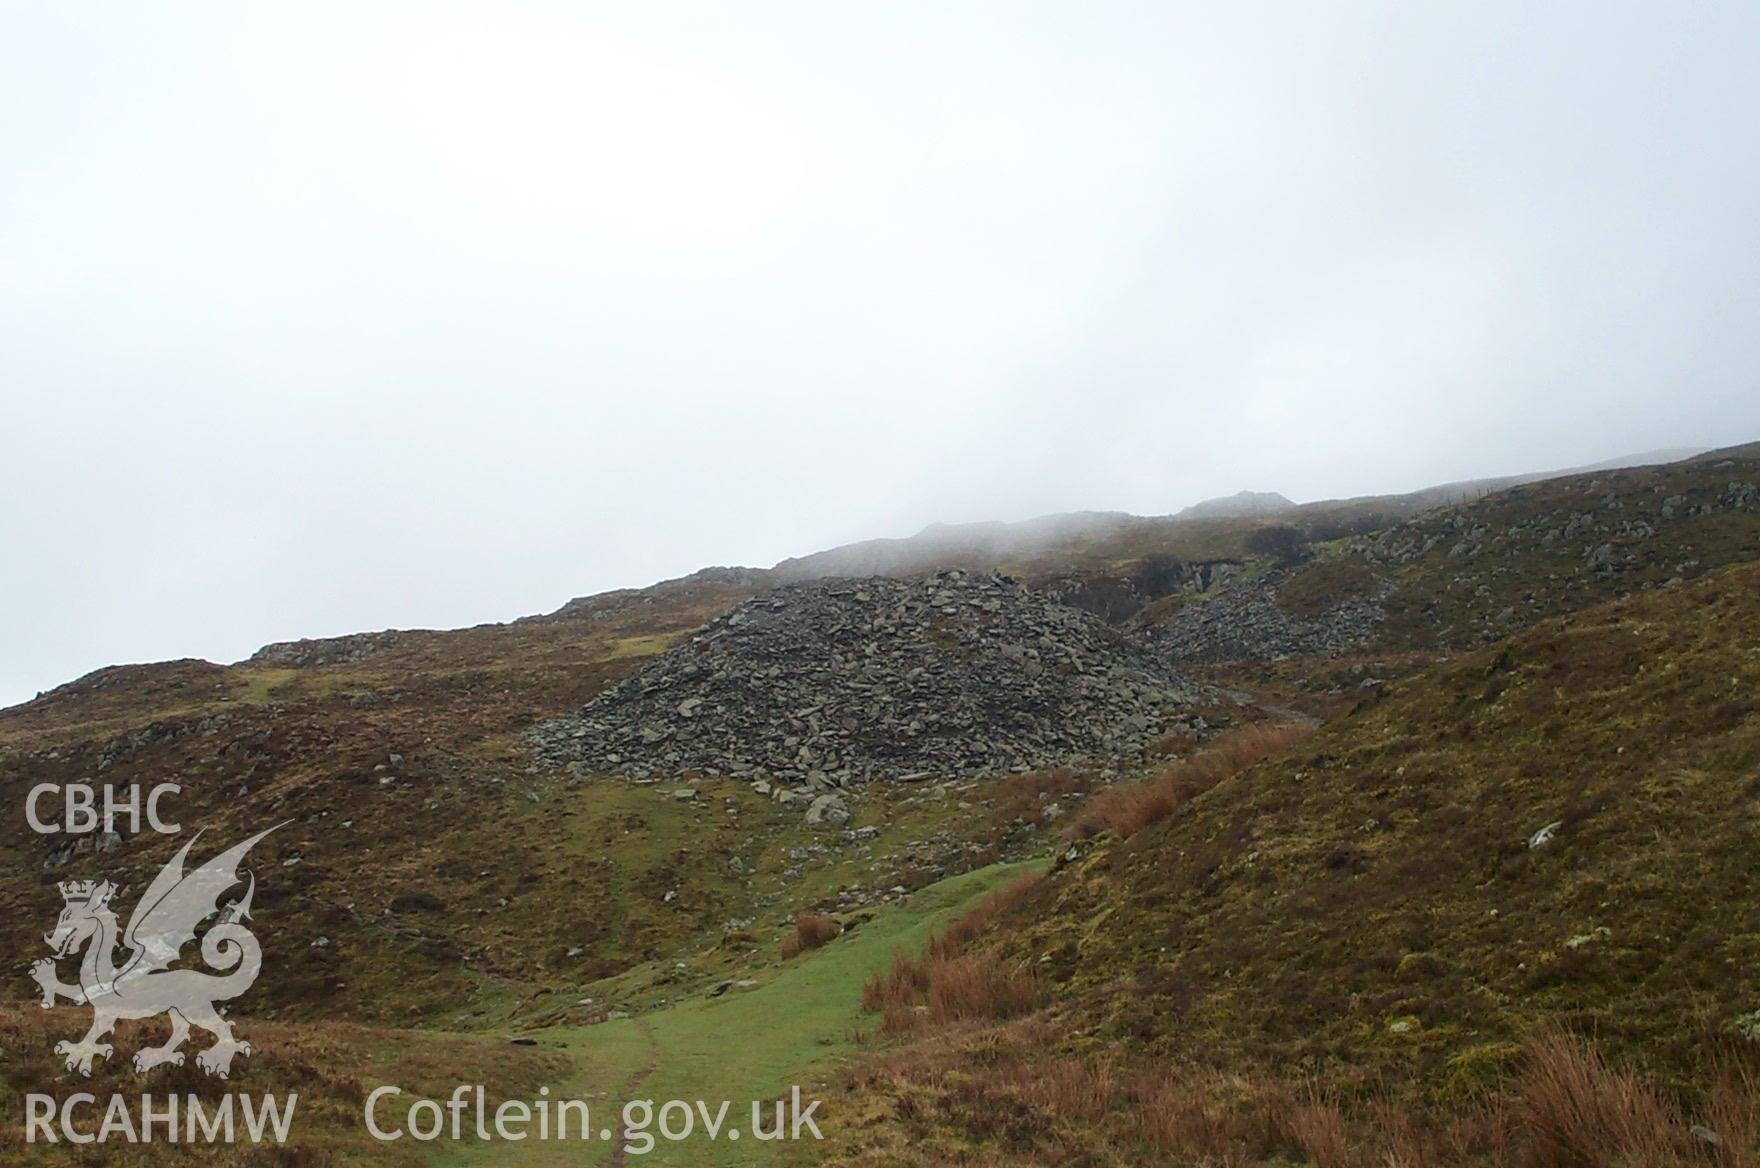 Digital photograph of Tal-y-fan Slate Quarry from the South. Taken by P. Schofield on 19/02/2004 during the Eastern Snowdonia (North) Upland Survey.